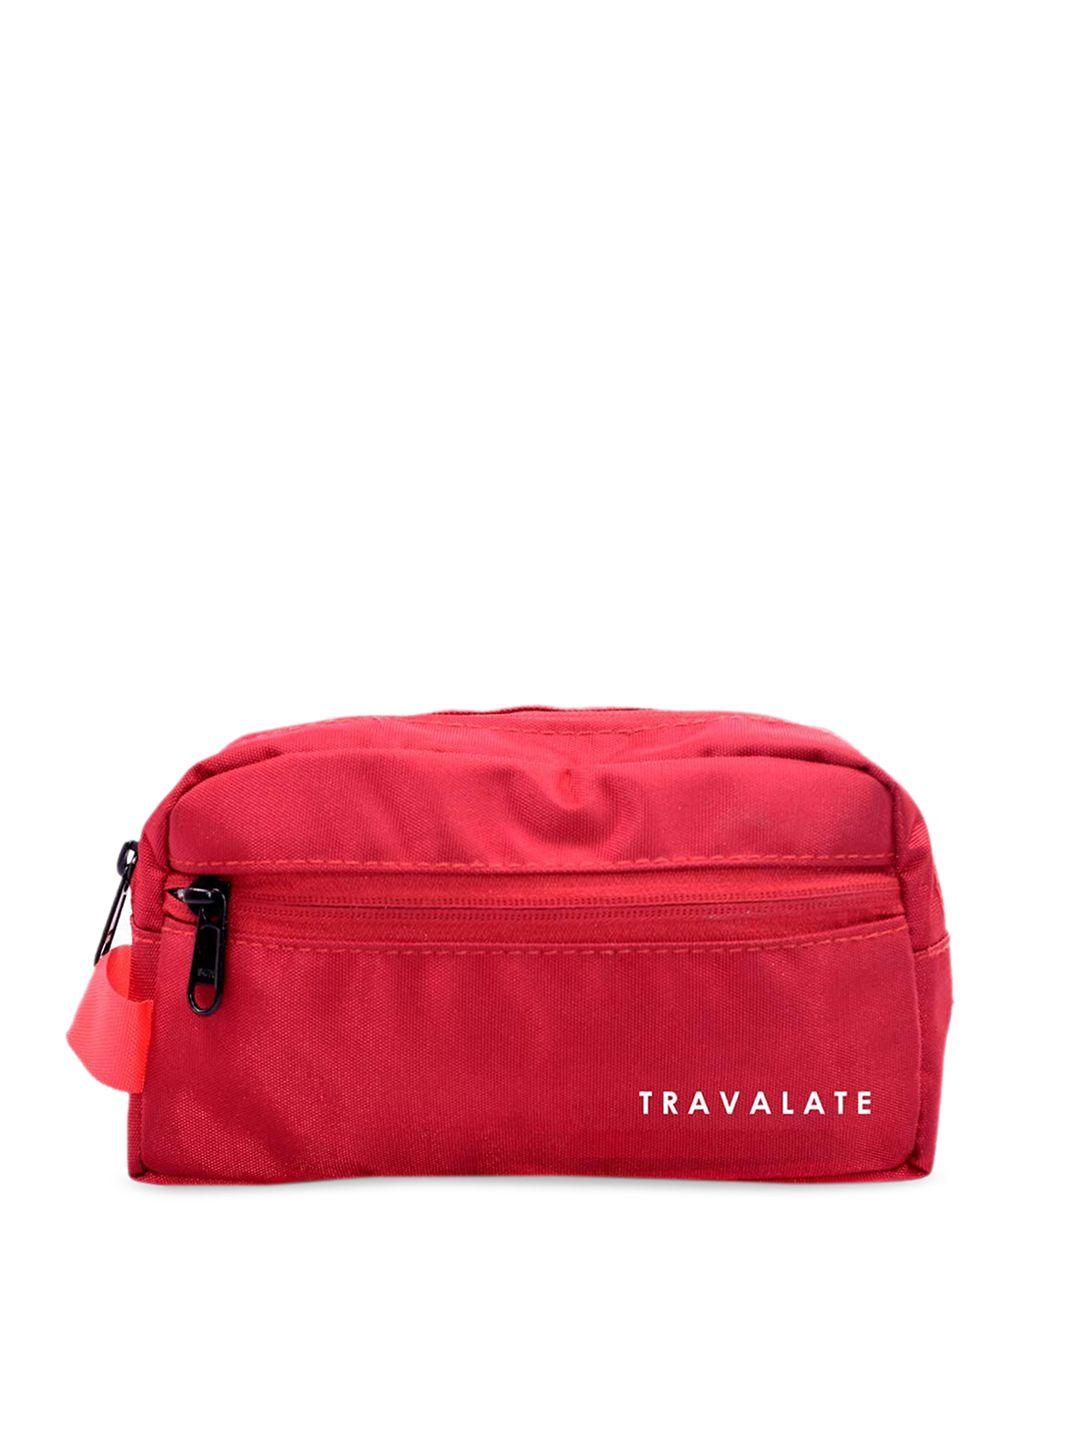 travalate red polyester highly durable cosmetic travel pouch